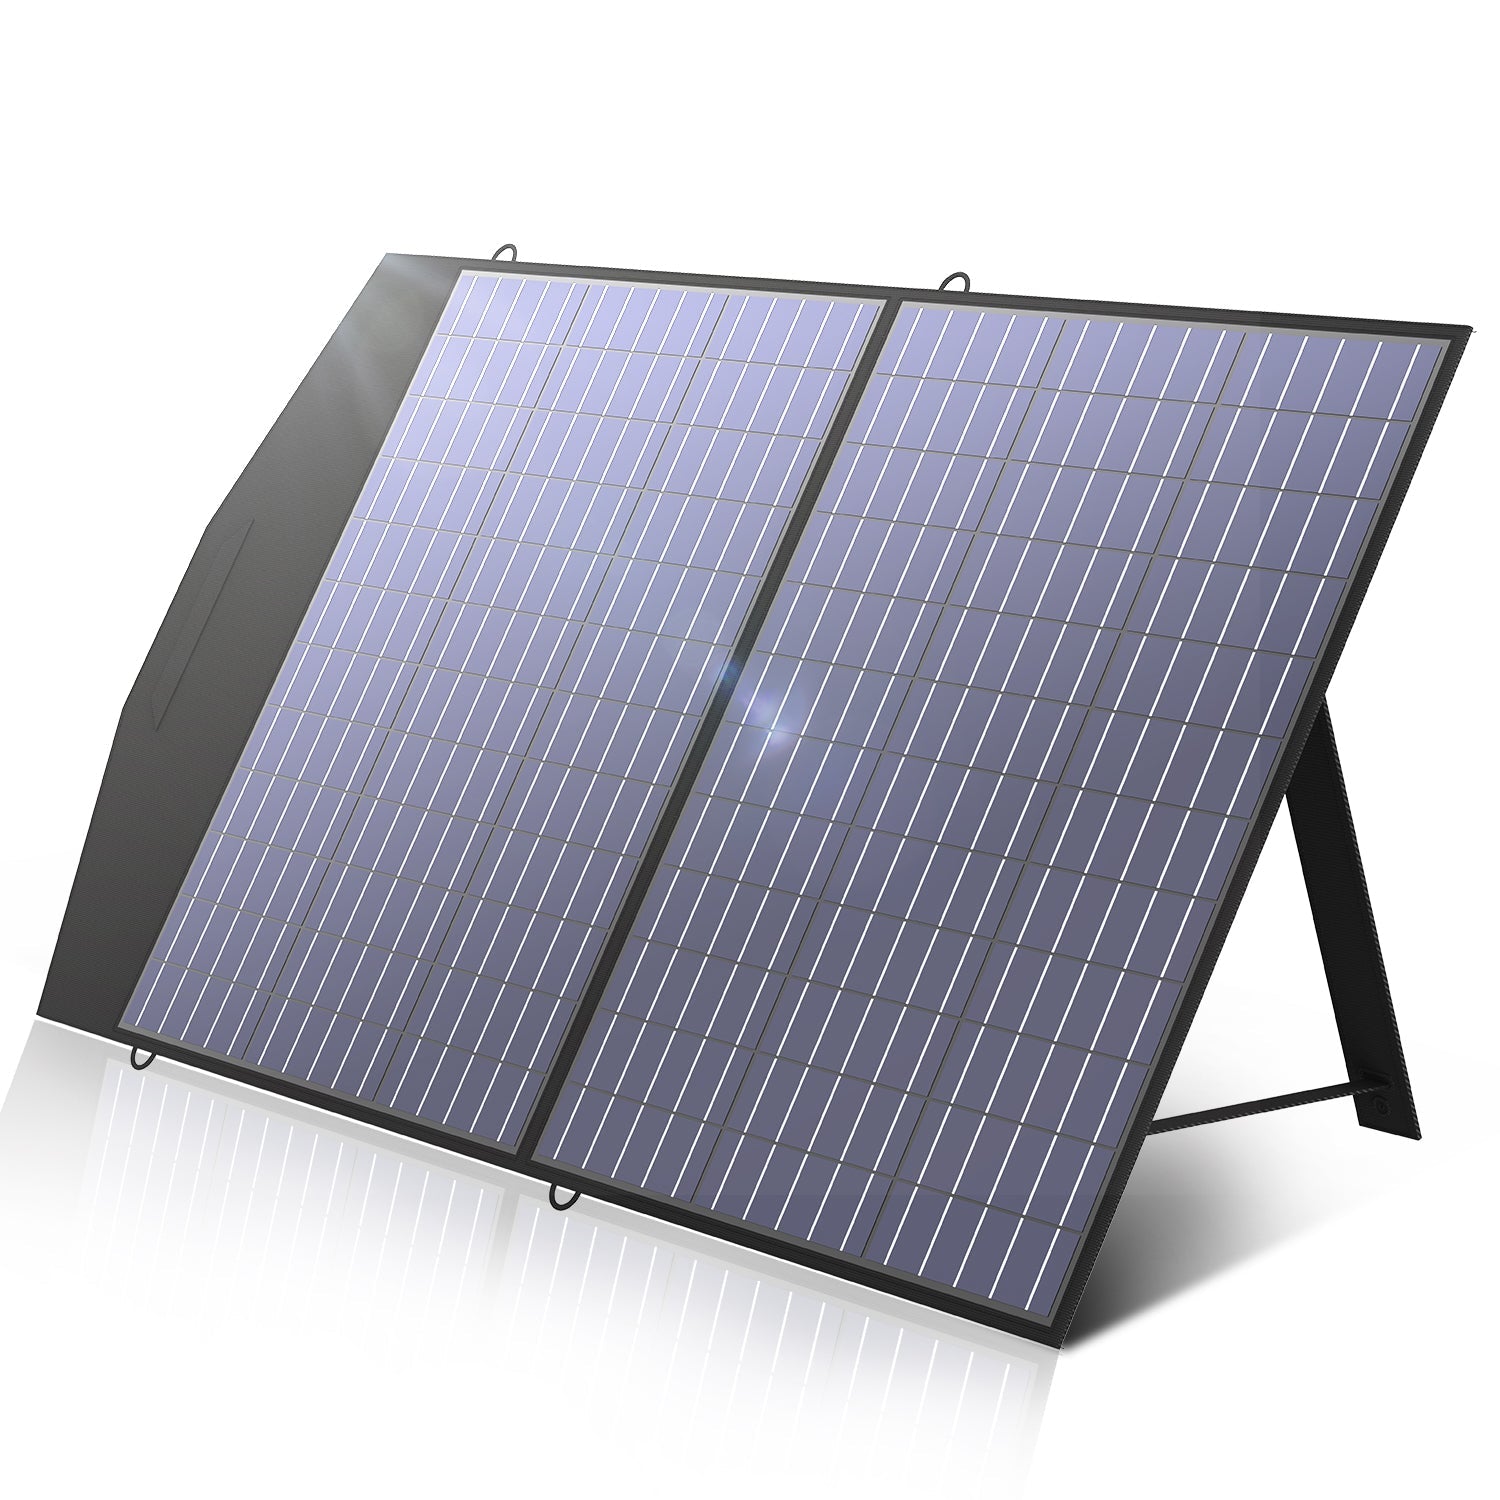 ALLPOWERS S2000 Solar Generator Portable Power Station 2000W 1500Wh with 2PCS SP027 100W Solar Panel